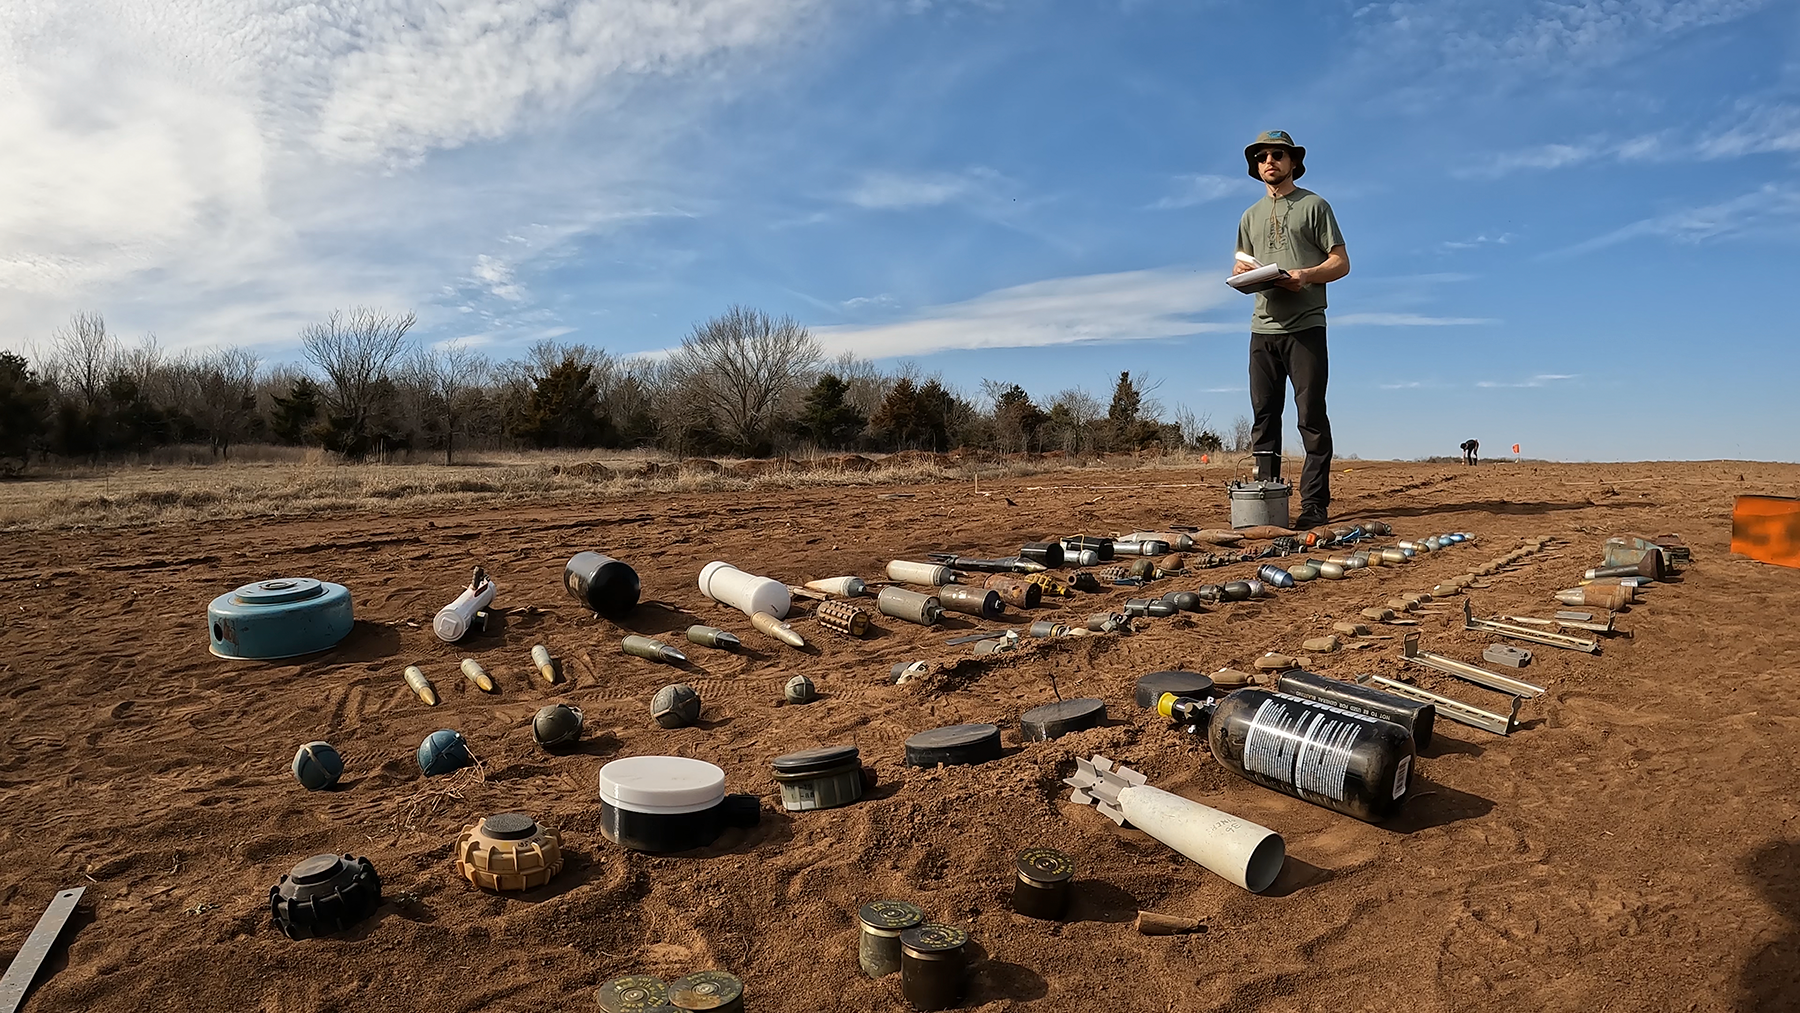 A man stands in a field with several dozen objects of different shapes and sizes lying on the ground in front of him.